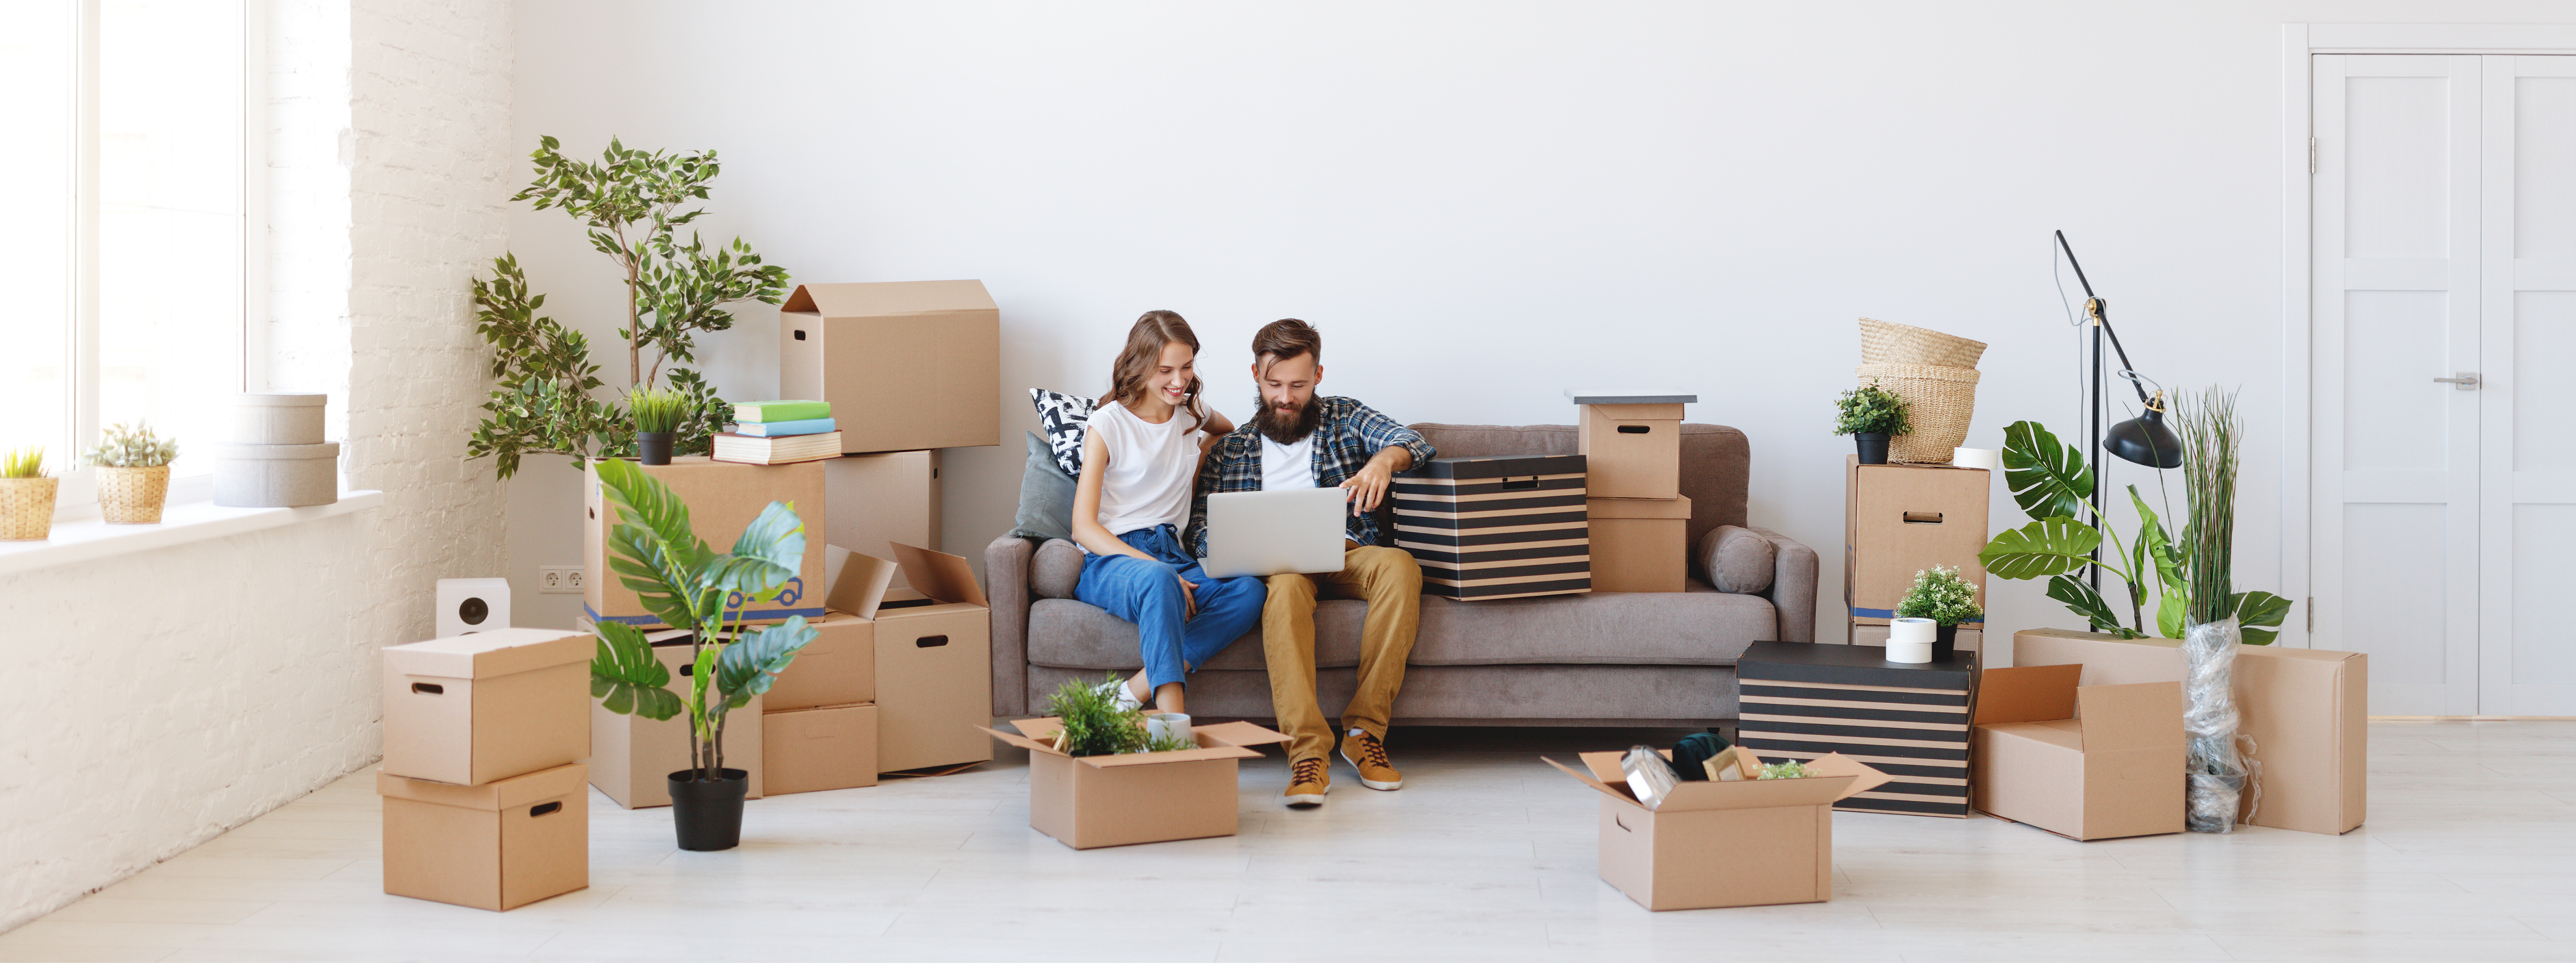 people sitting among moving boxes